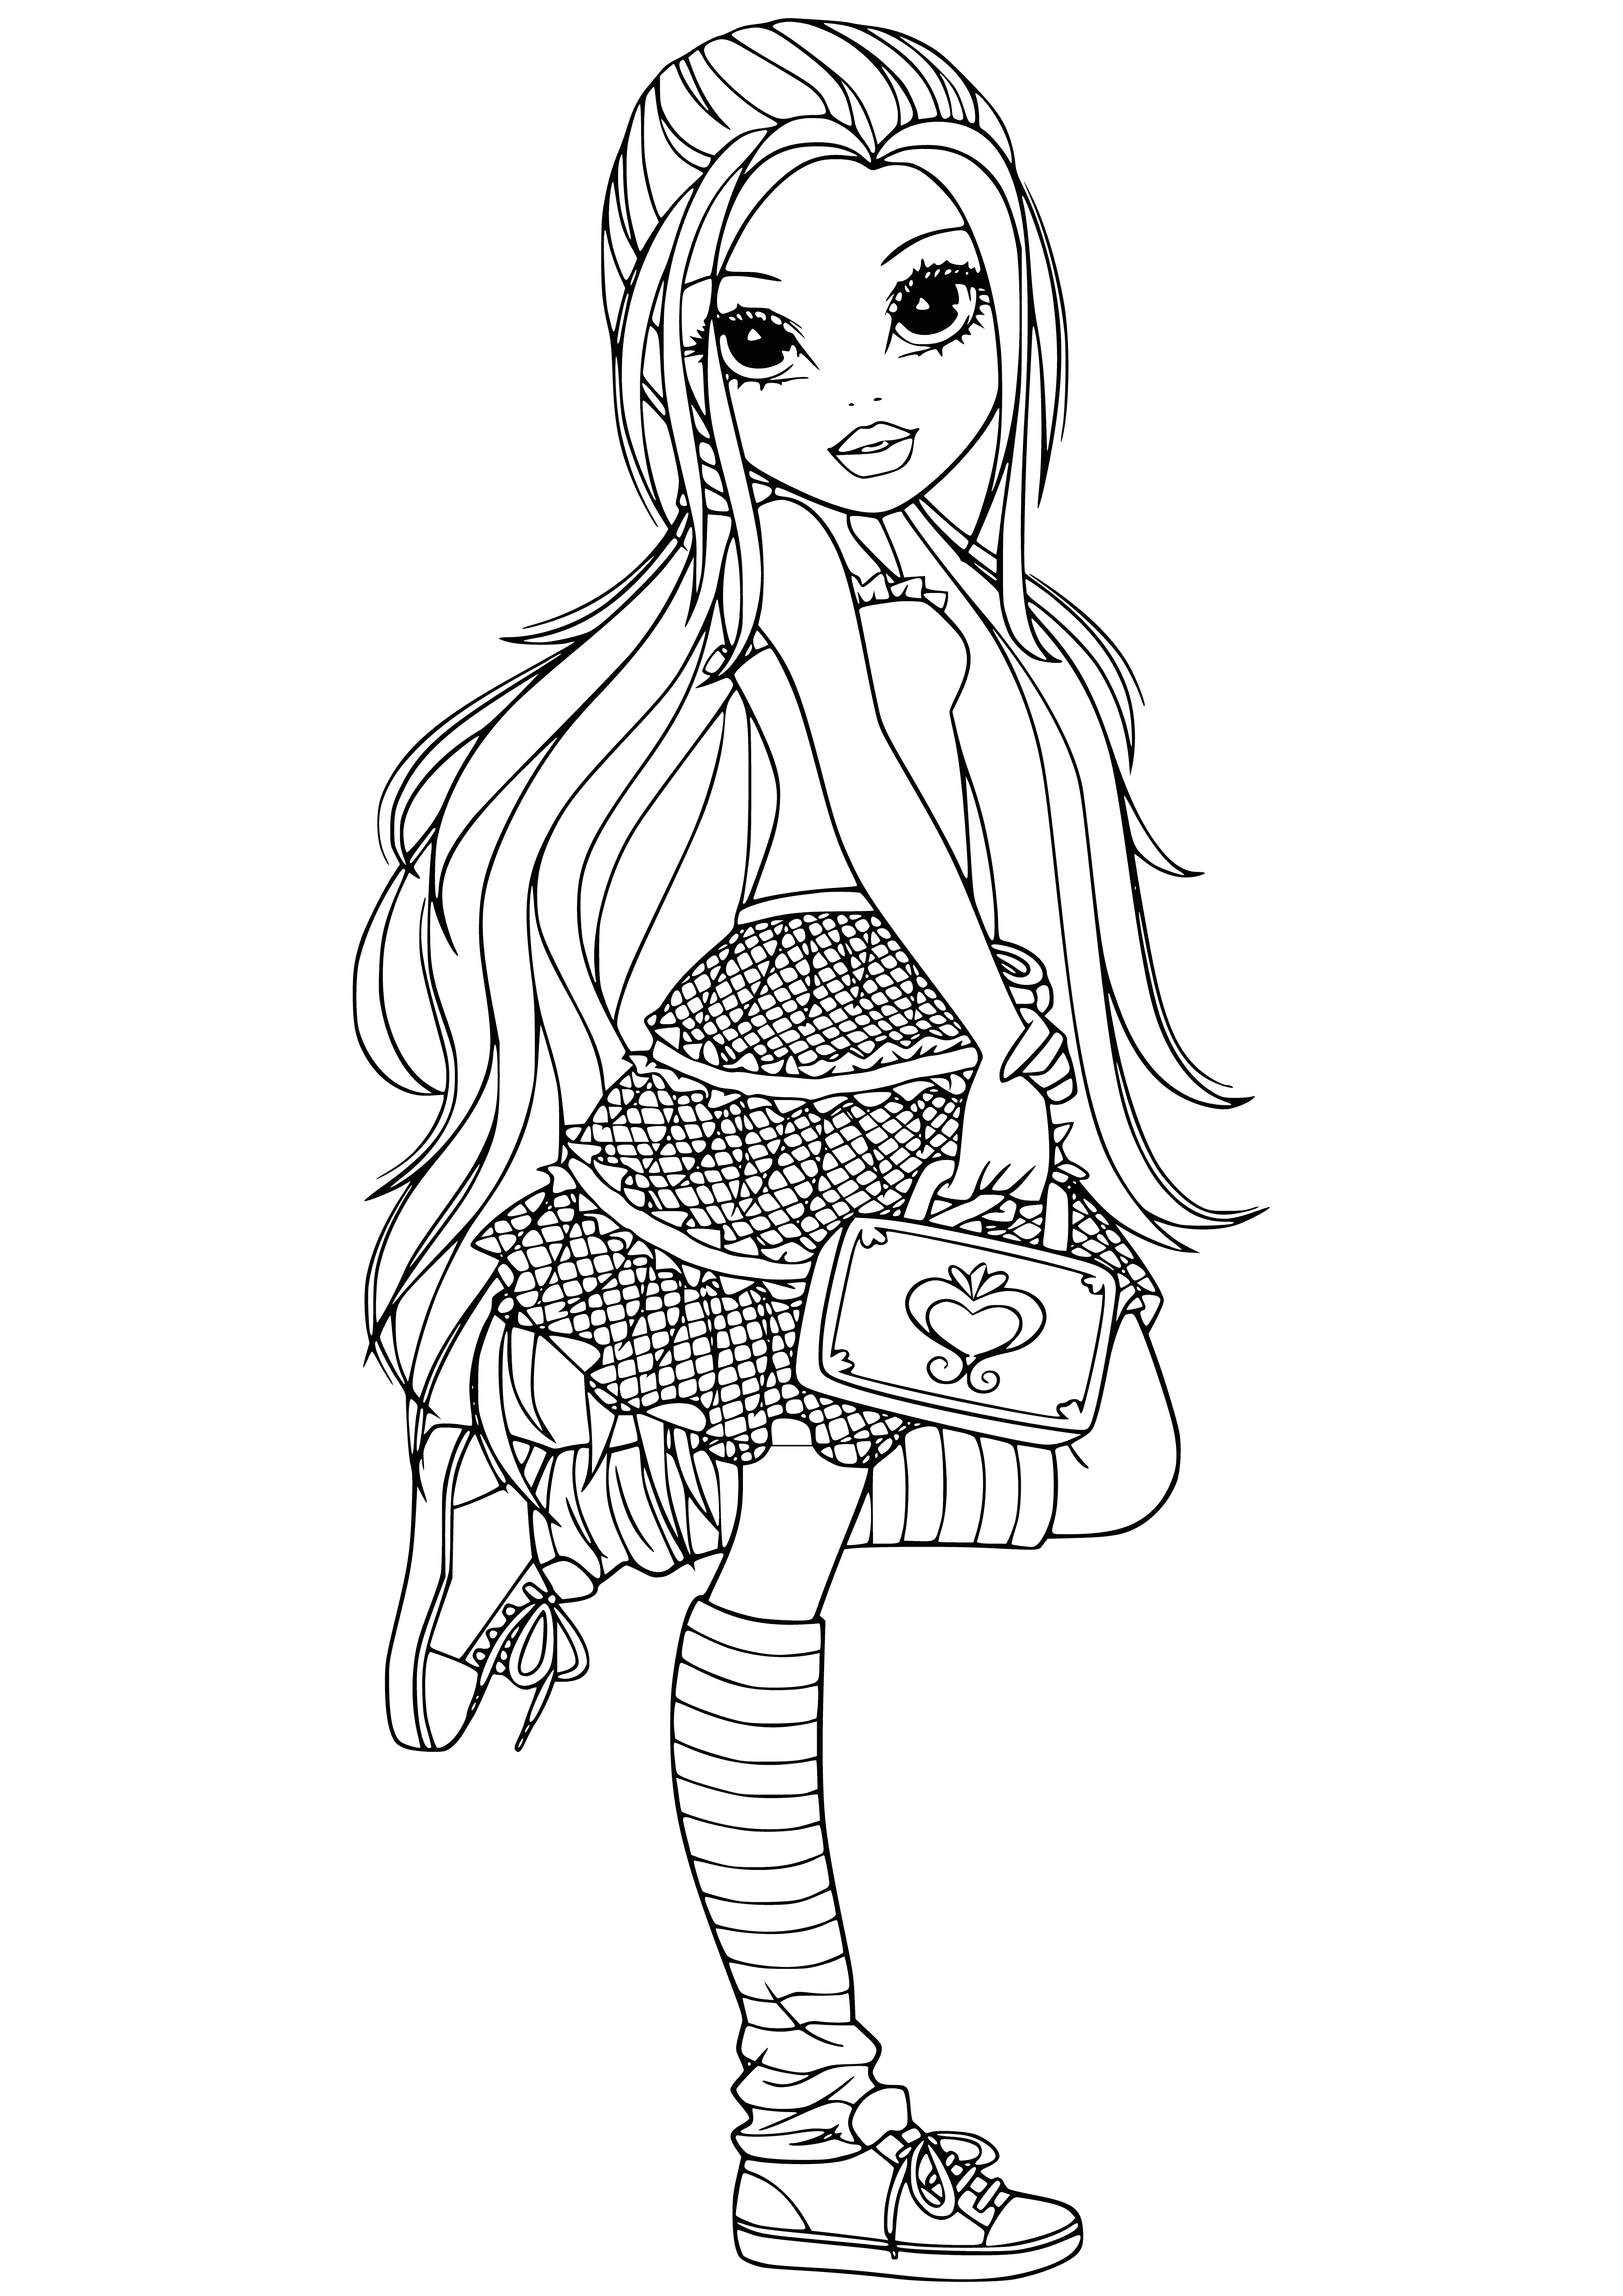 coloring page: Avery is a joyful, independent Moxie Girl who loves to explore and share her knowledge. She's a true friend who has your back.